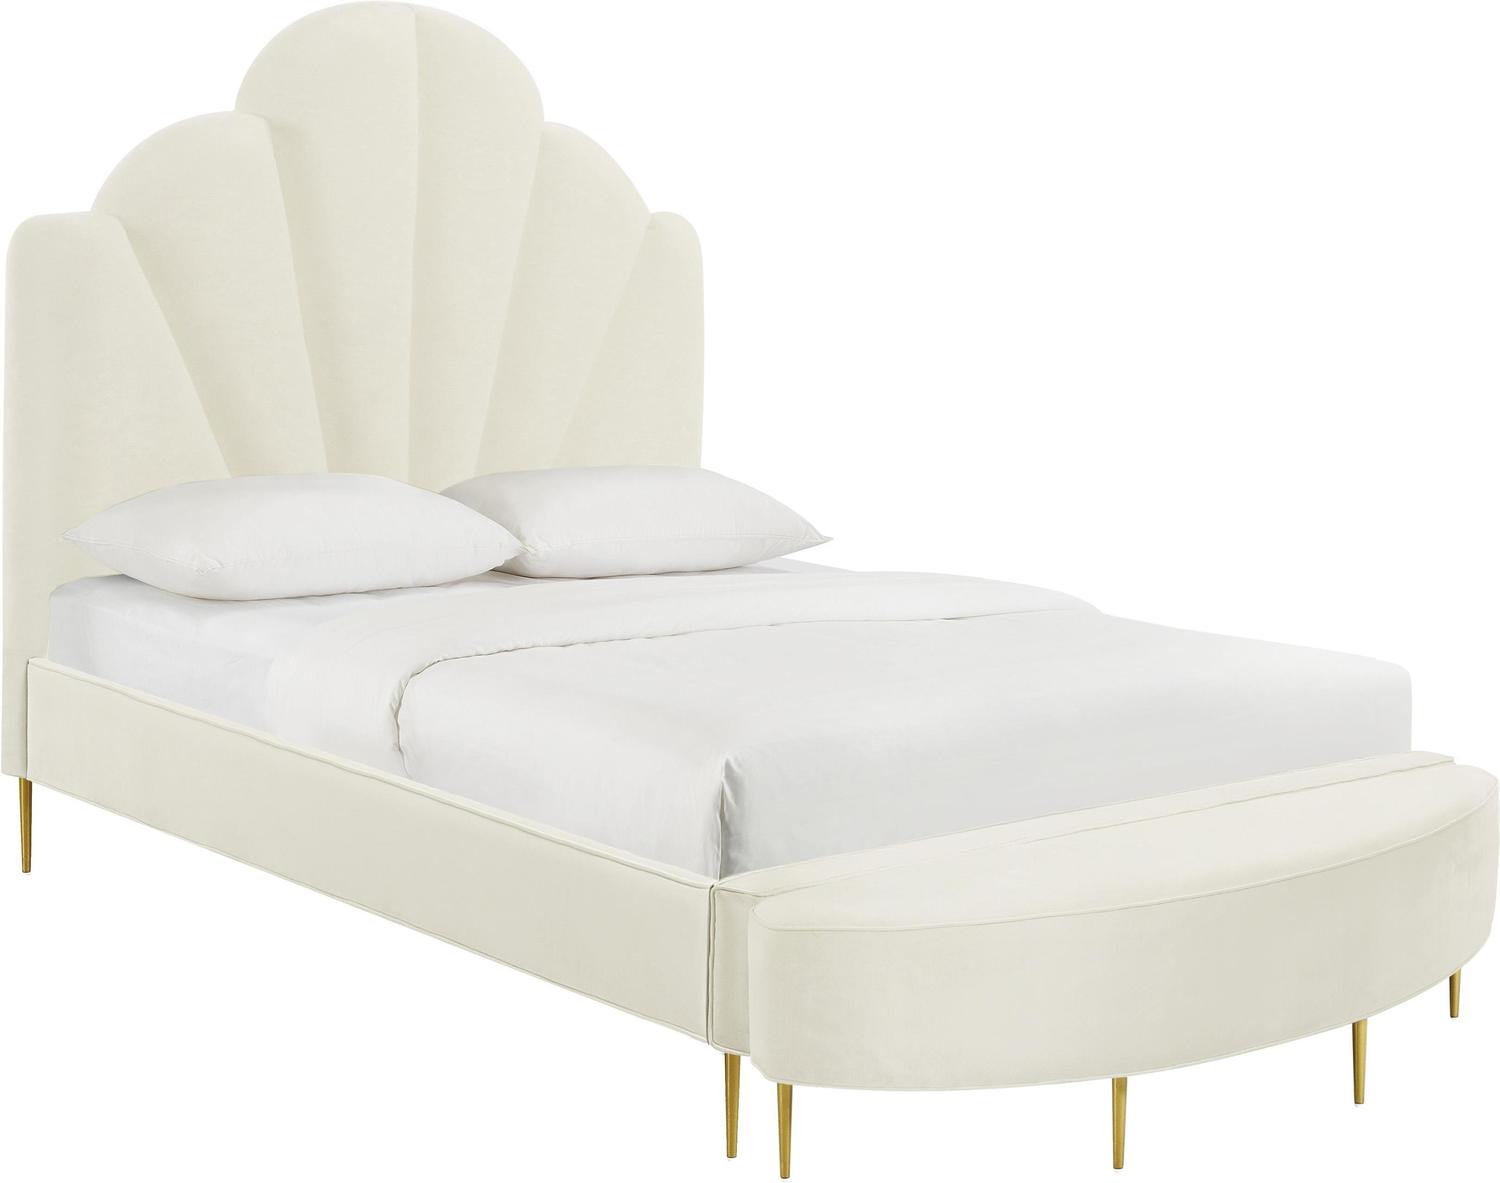 twin mattress with boxspring Tov Furniture Beds Cream